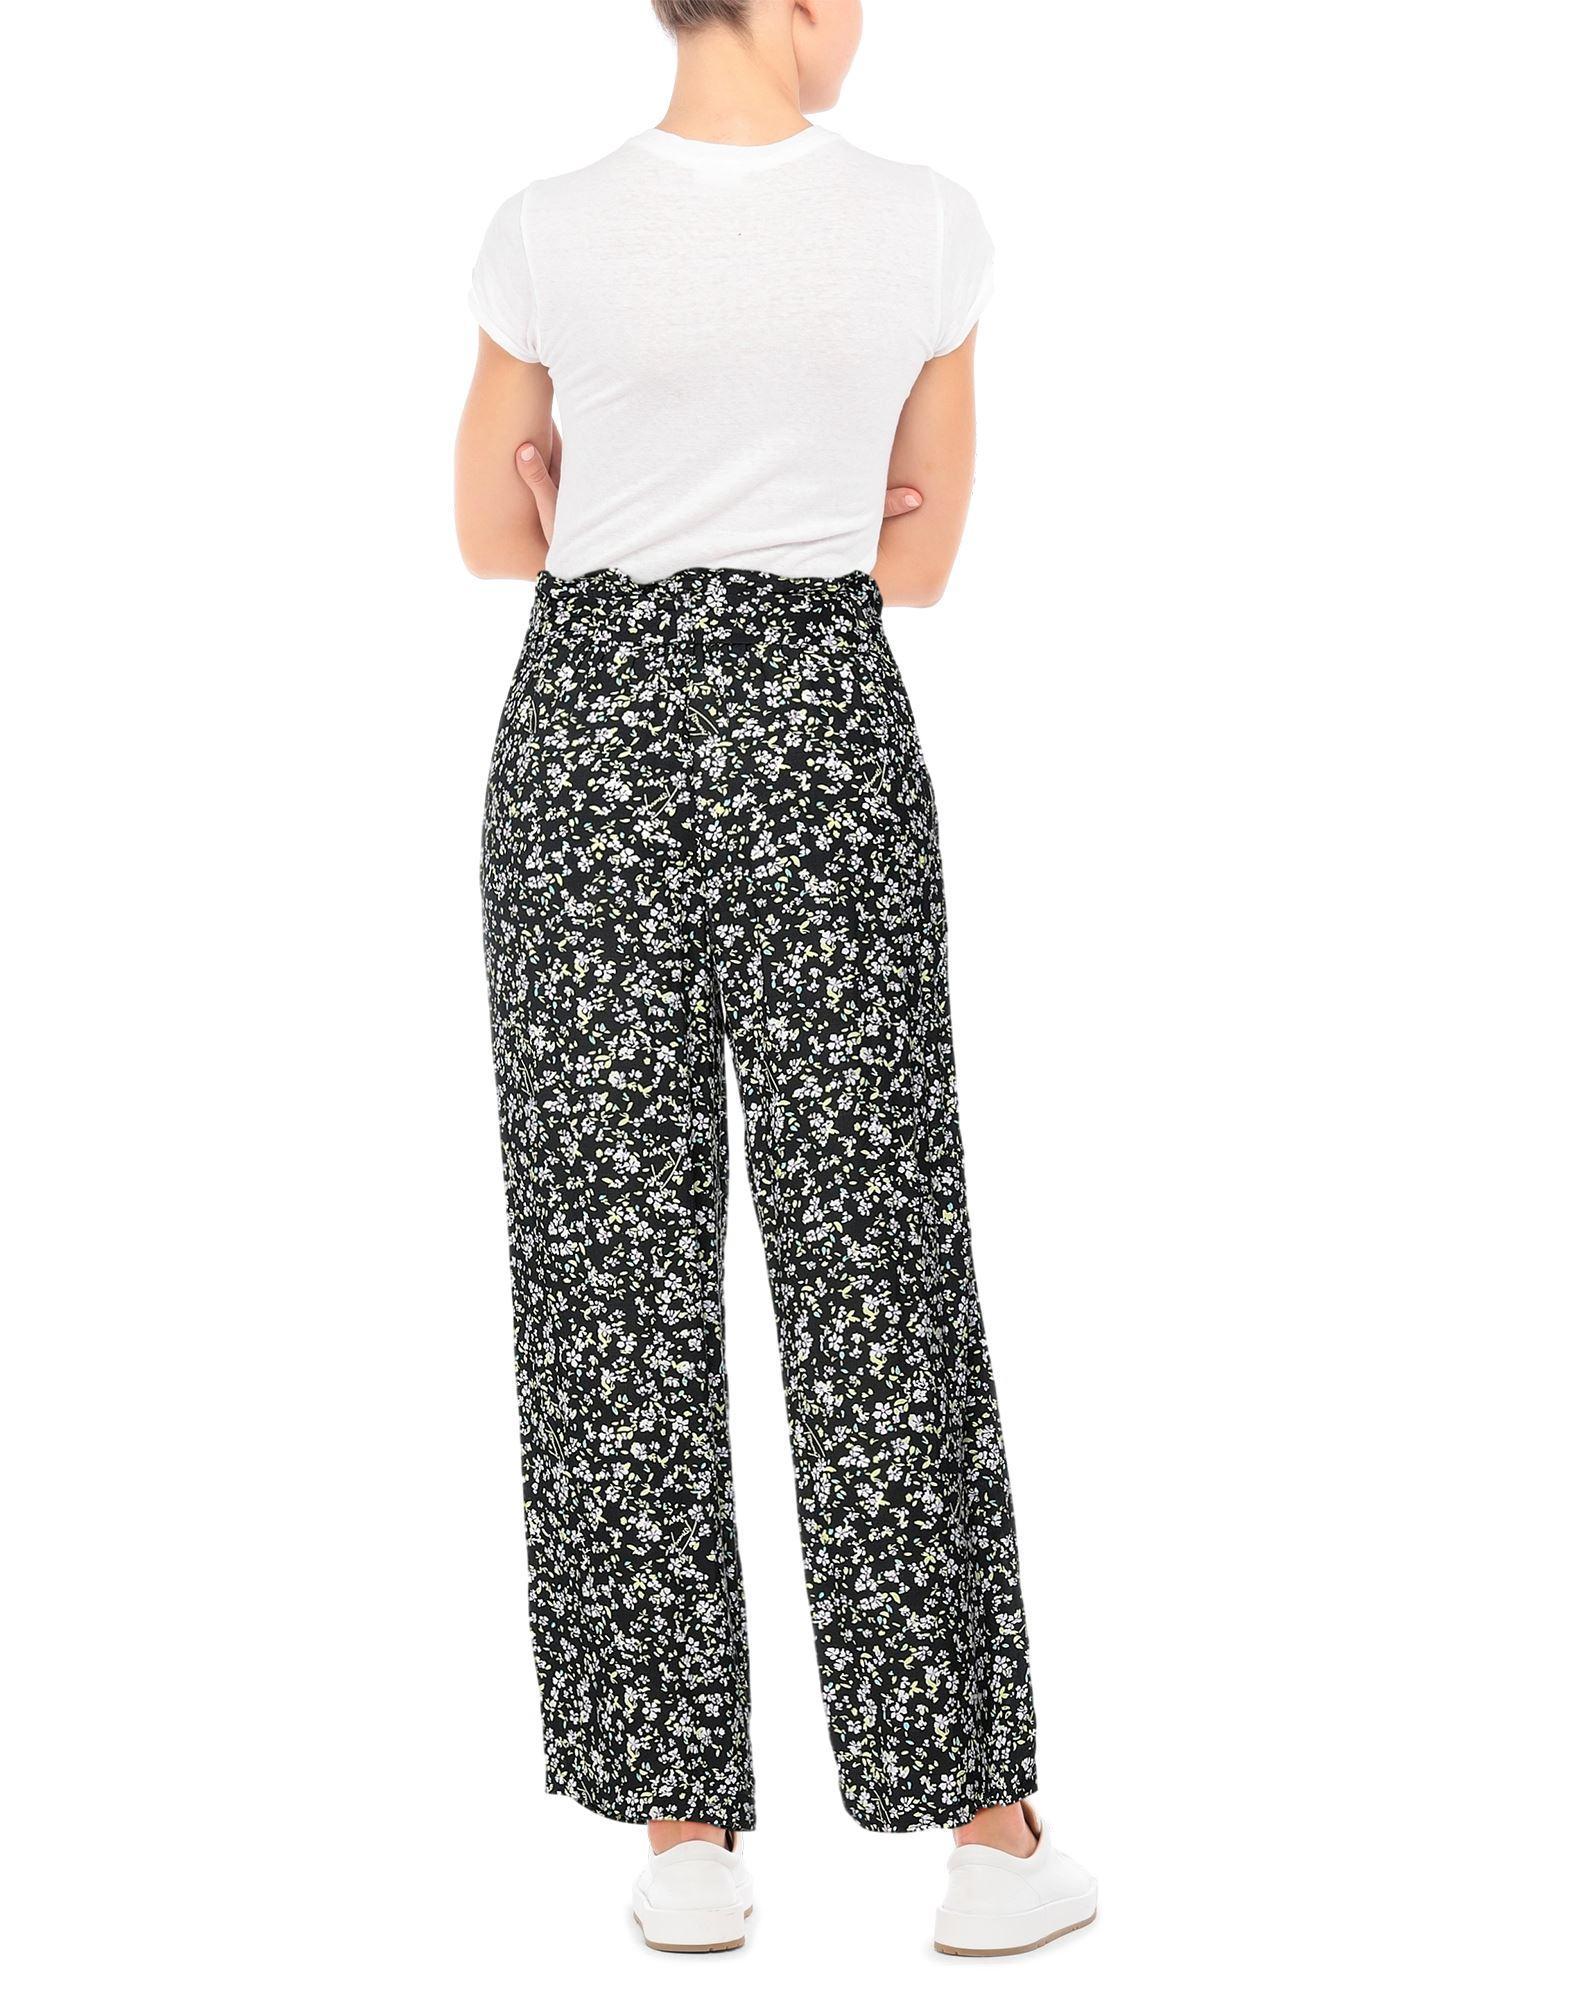 Tommy Hilfiger Synthetic Trouser in Black Slacks and Chinos Harem pants Womens Clothing Trousers 